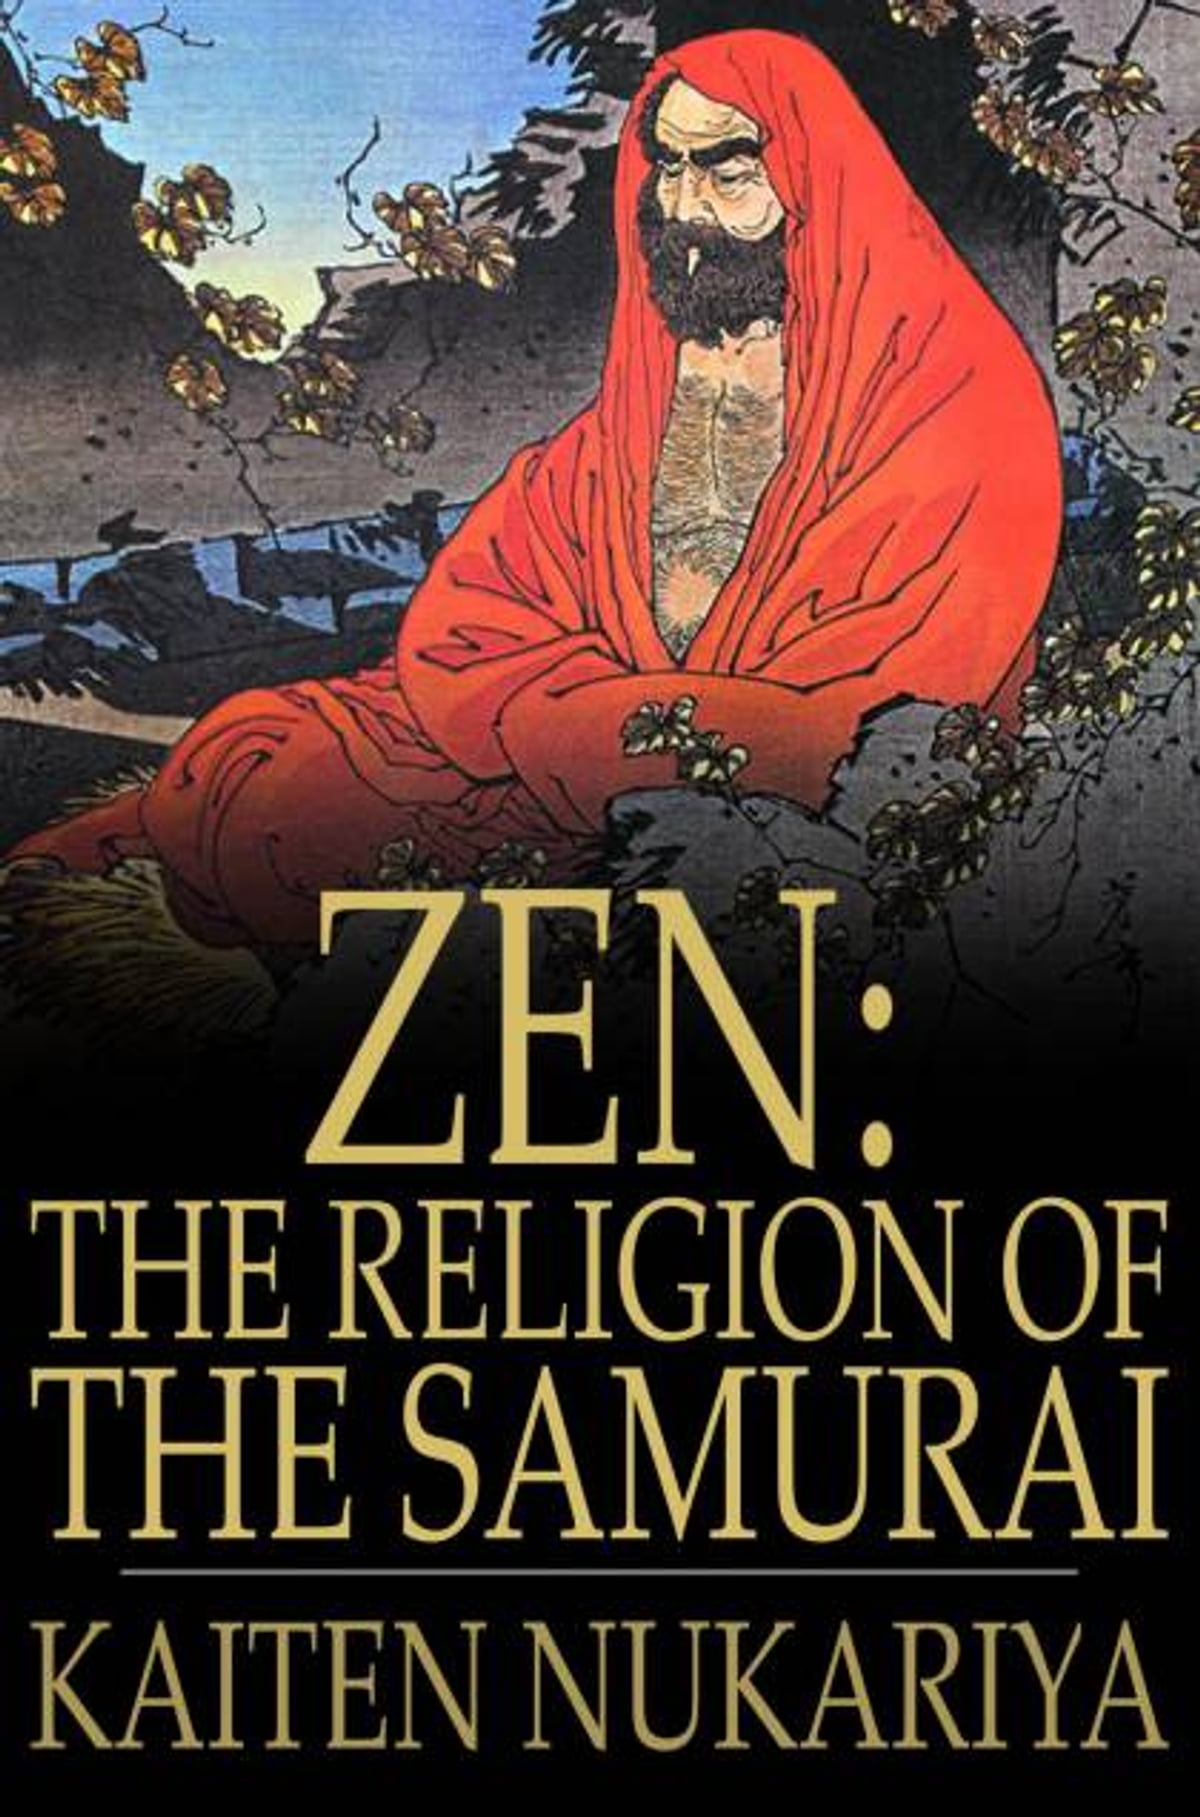 Religion of the Samurai: A Study of Zen Philosophy and Discipline in China and Japan